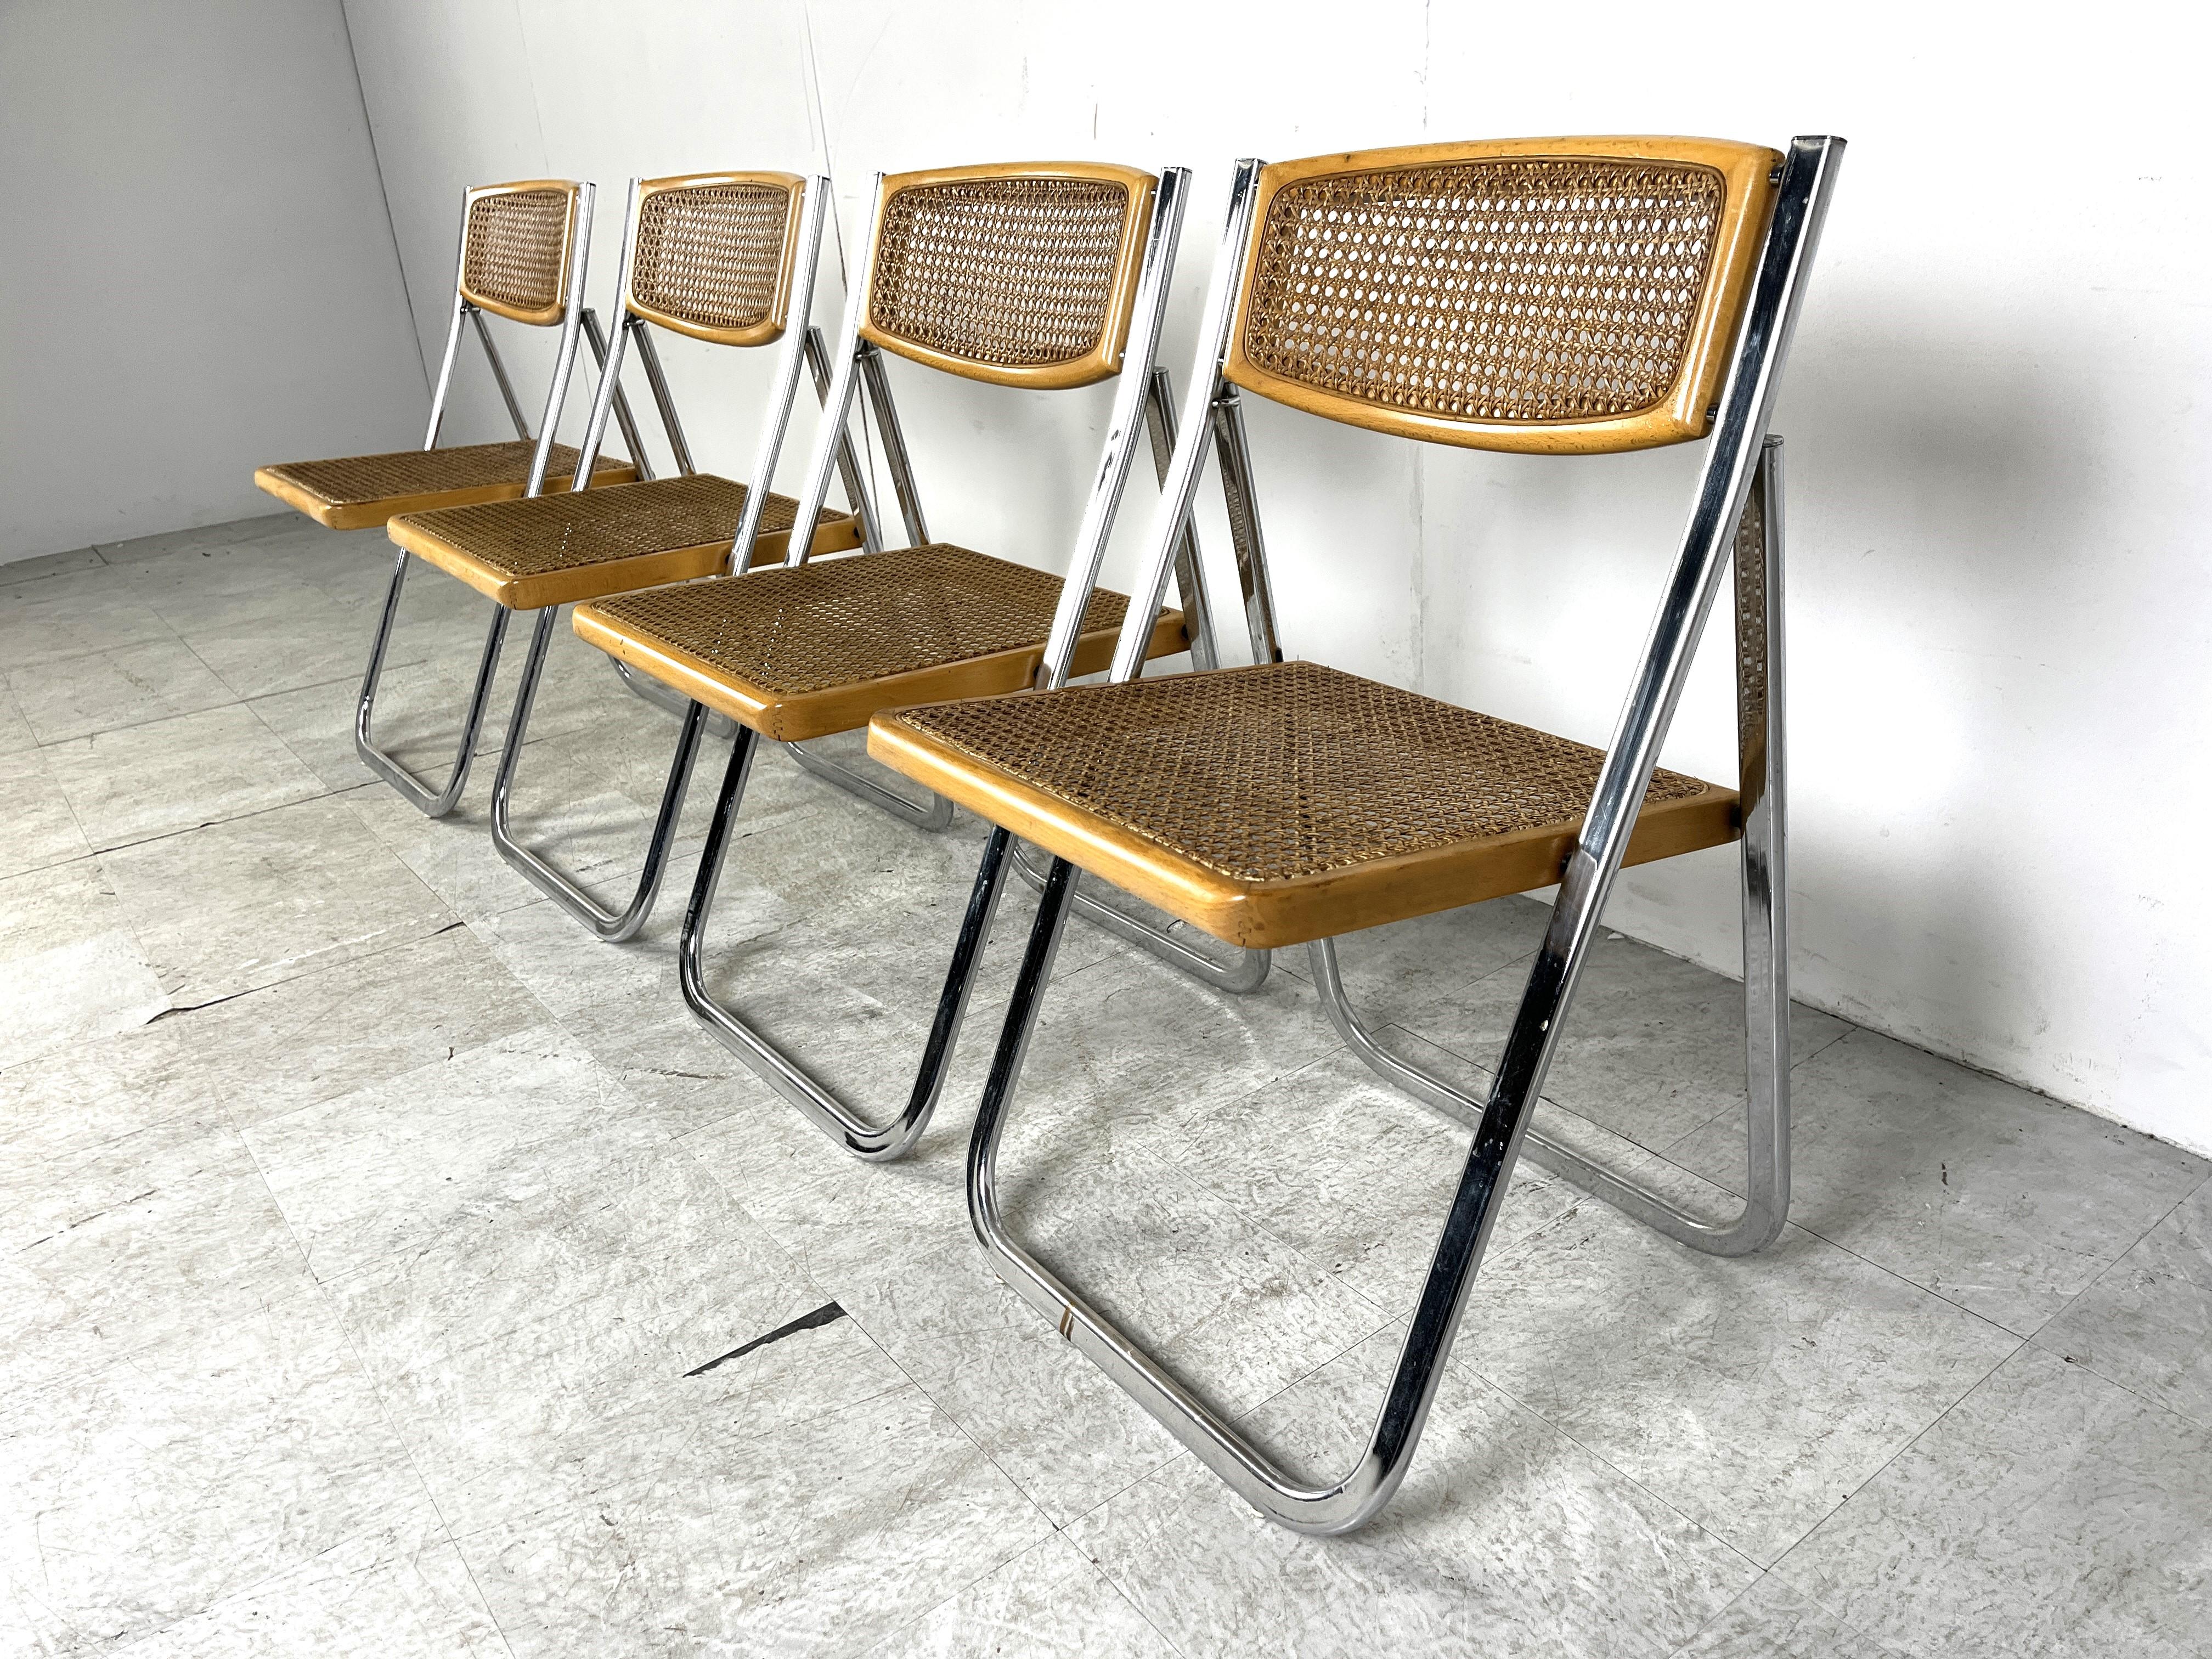 Late 20th Century Vintage rattan folding chairs, 1970s - set of 4 For Sale